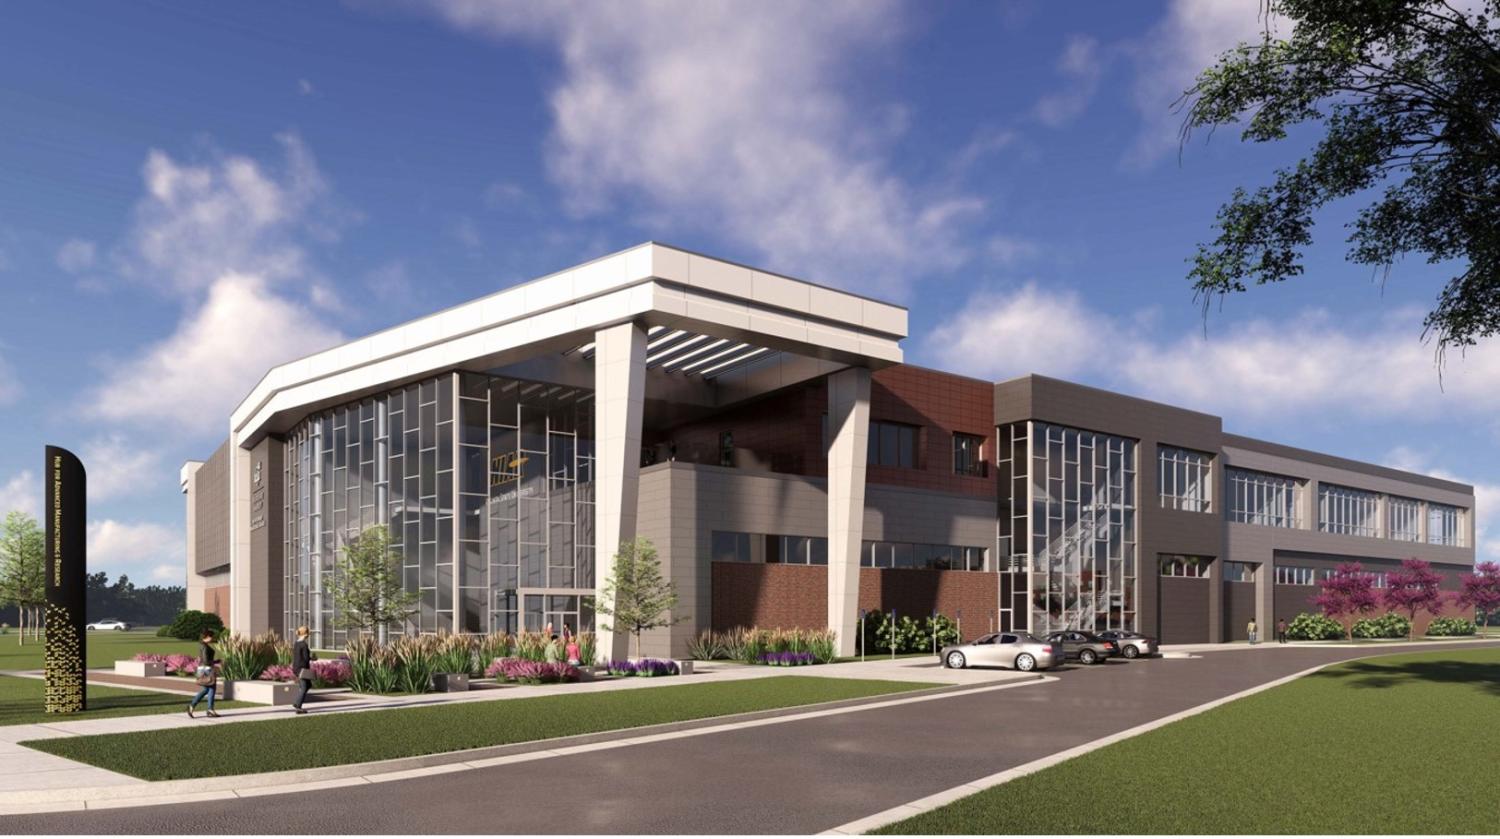 An architectural rendering of the main entrance of the Hub for Advanced Manufacturing and Research (HAMR) facility to be constructed on the Innovation Campus at Wichita State University. Credit: Wichita State University